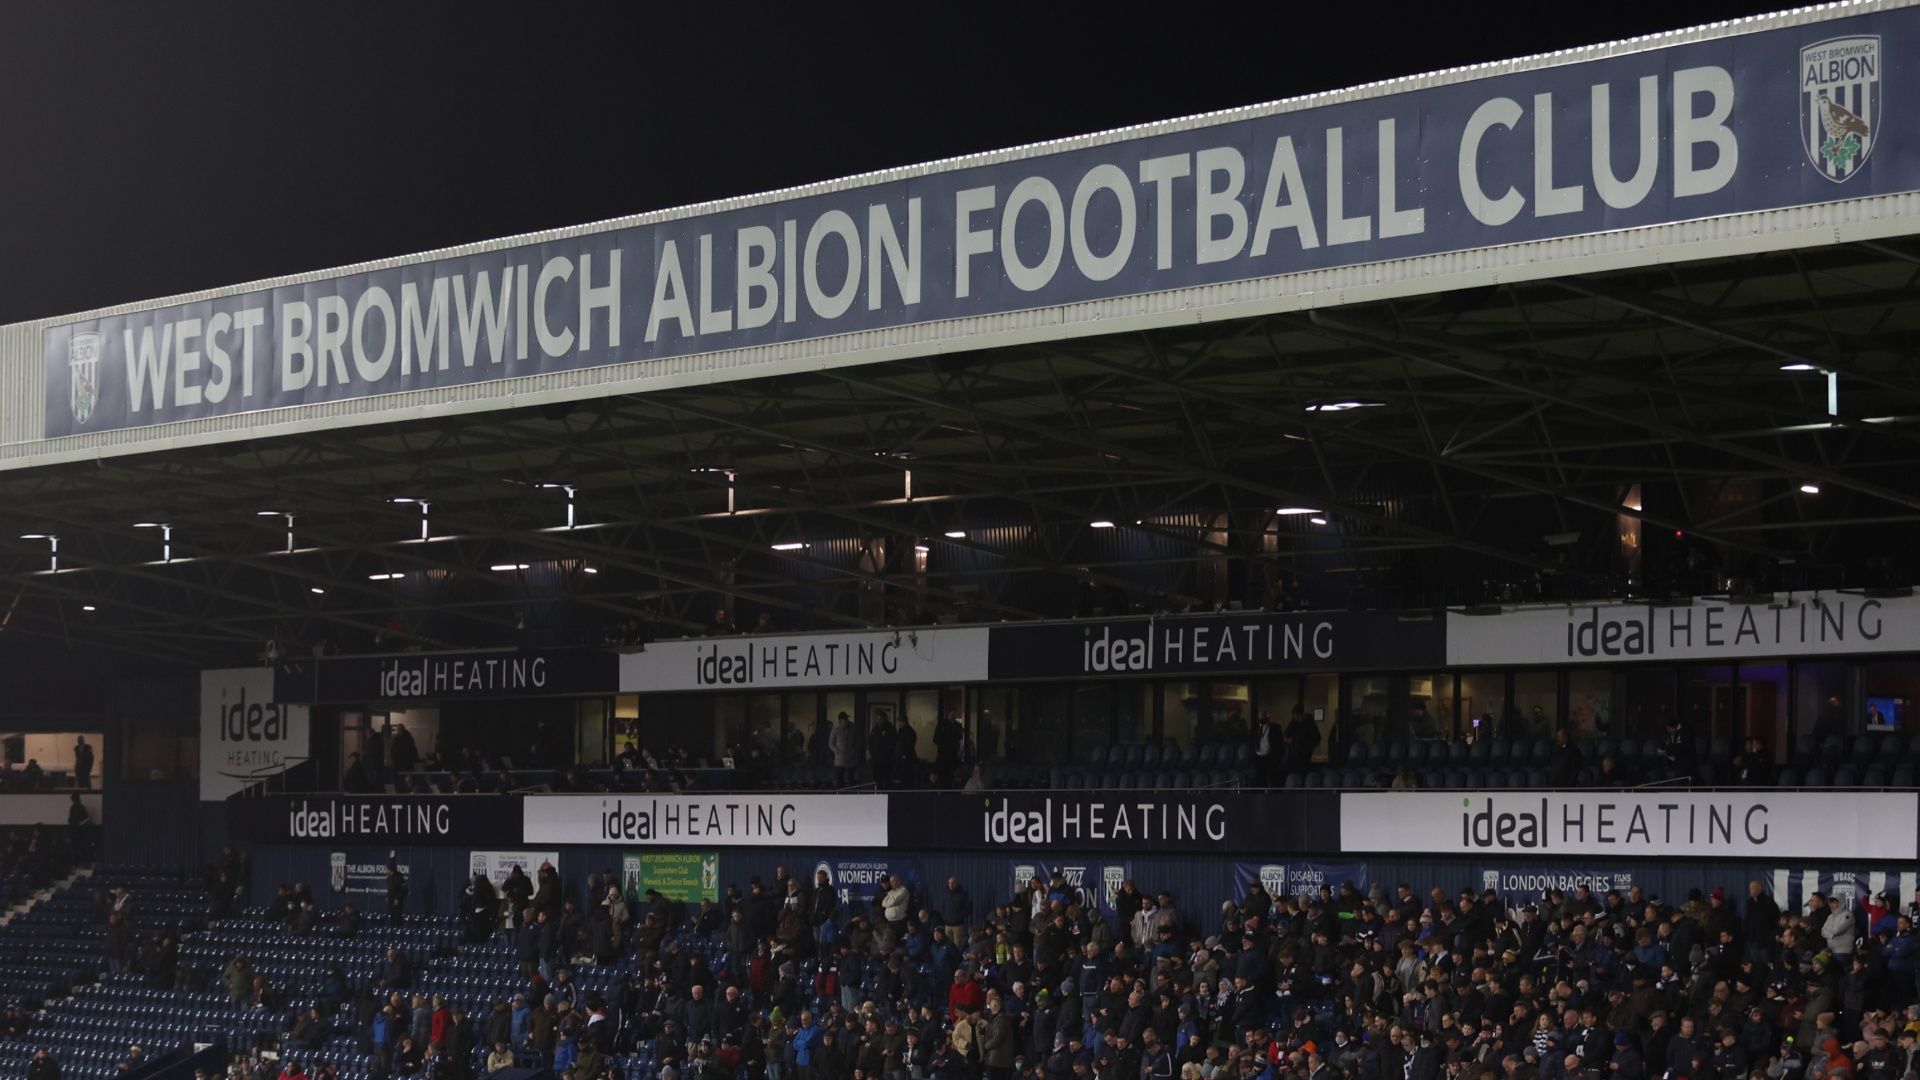 15 Facts About West Bromwich Albion 